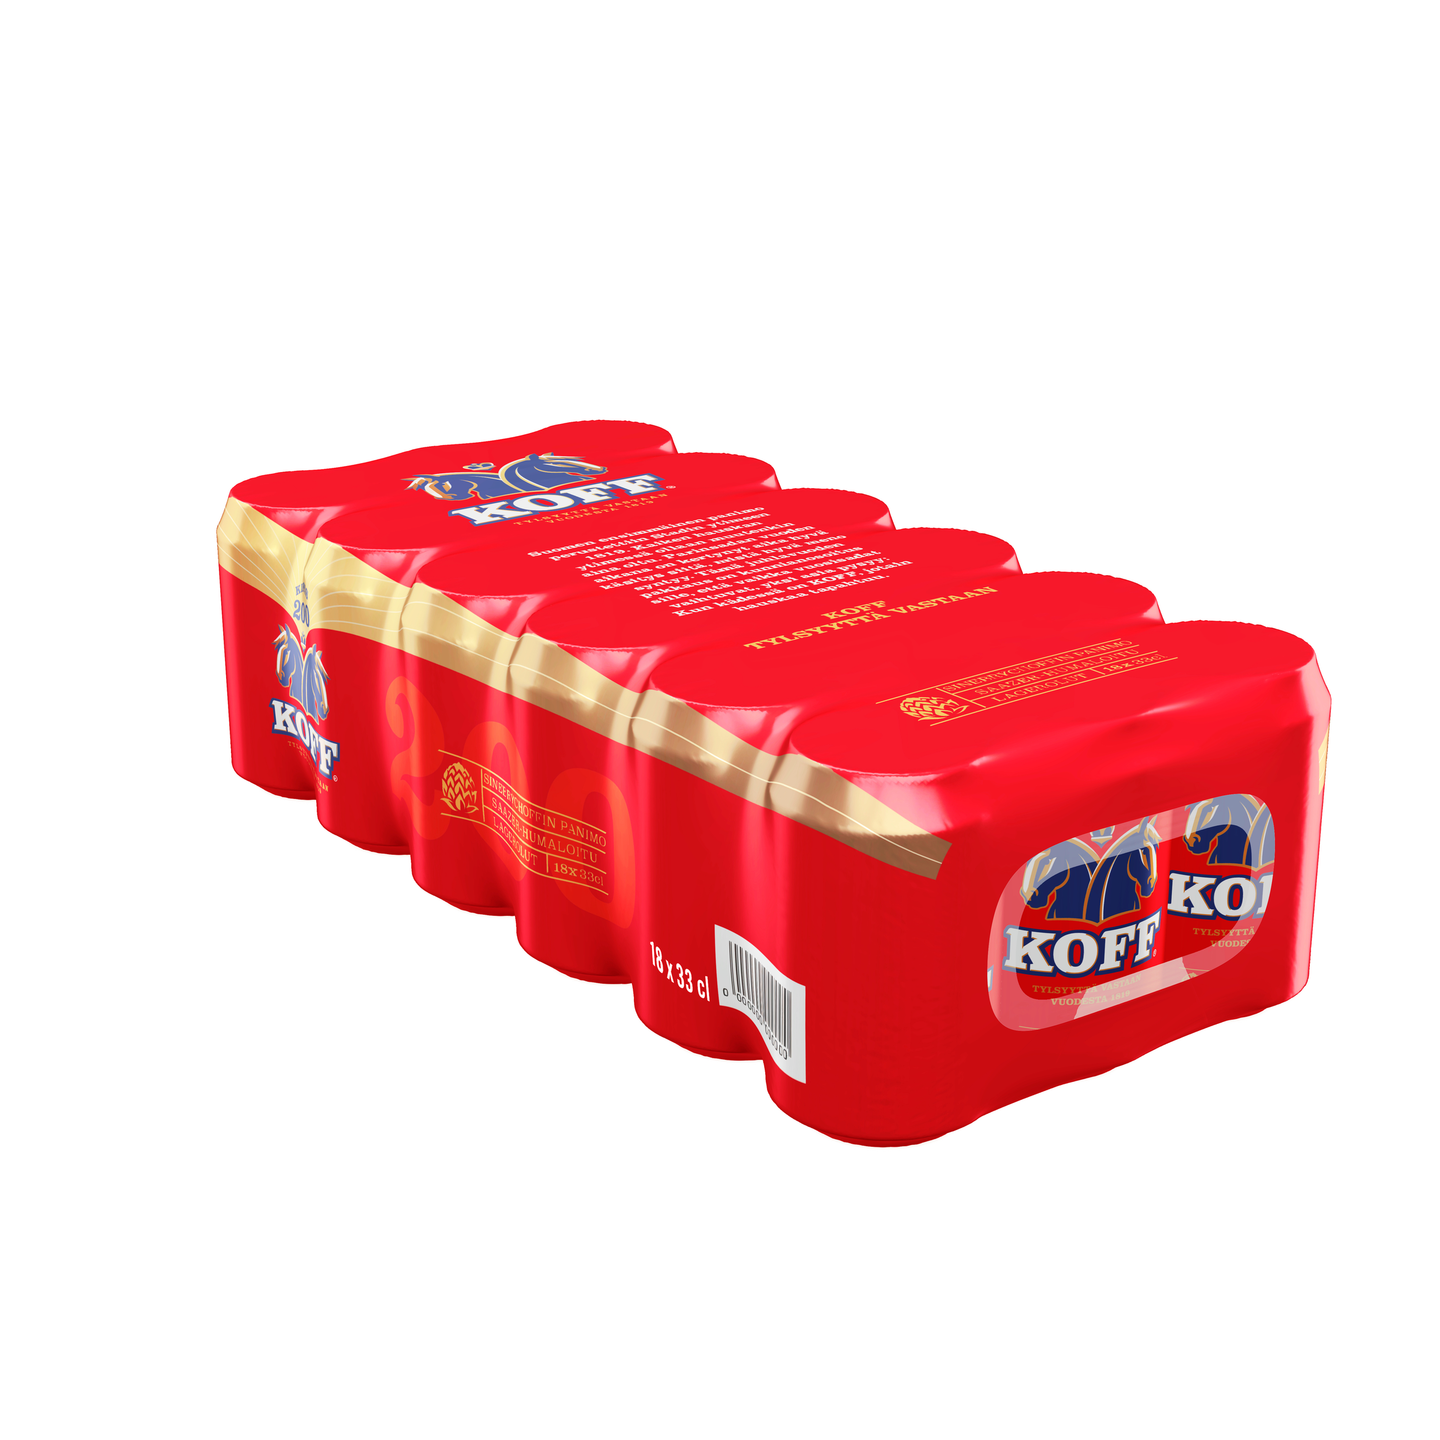 Koff 4,6% 0,33l 18-pack DOLLY